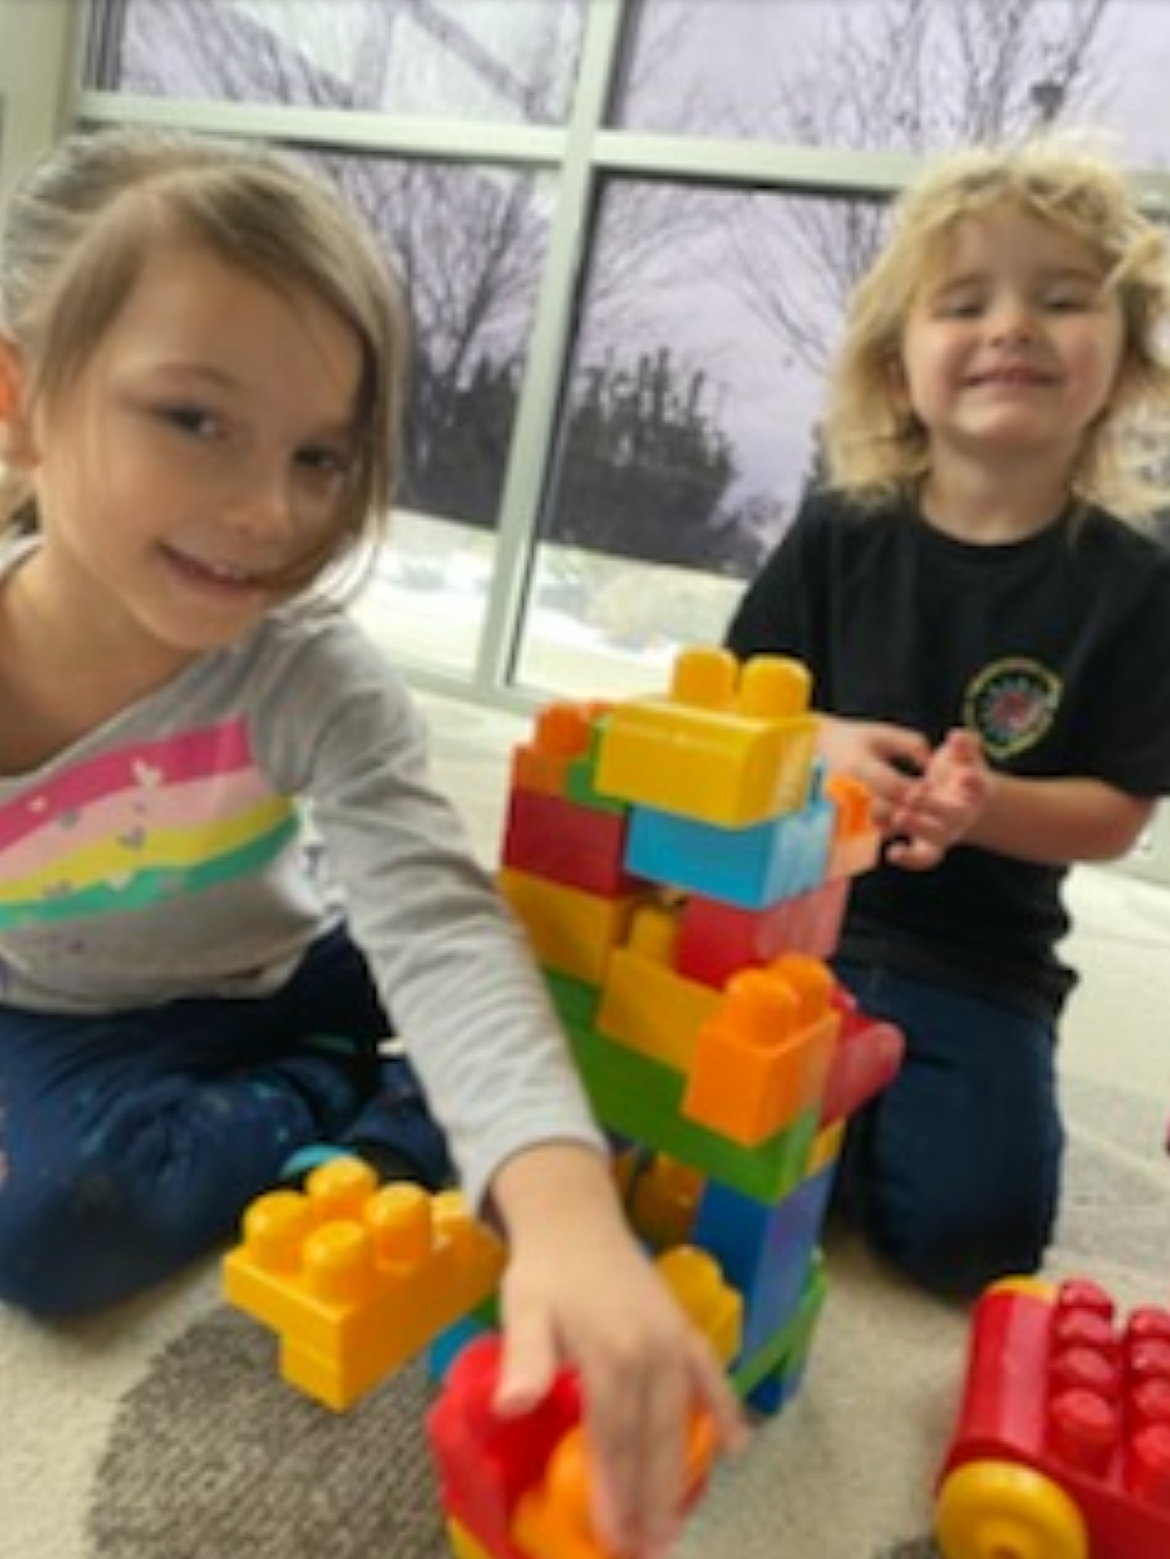 Amelia, 5, left, and Charlotte, 3, are two of the children who go to Nurturing Nest Childcare in Post Falls. Seven Nurturing Nest families were recipients of child care scholarships made possible through generous donations and United Way of North Idaho and its Early Care and Education Task Force.